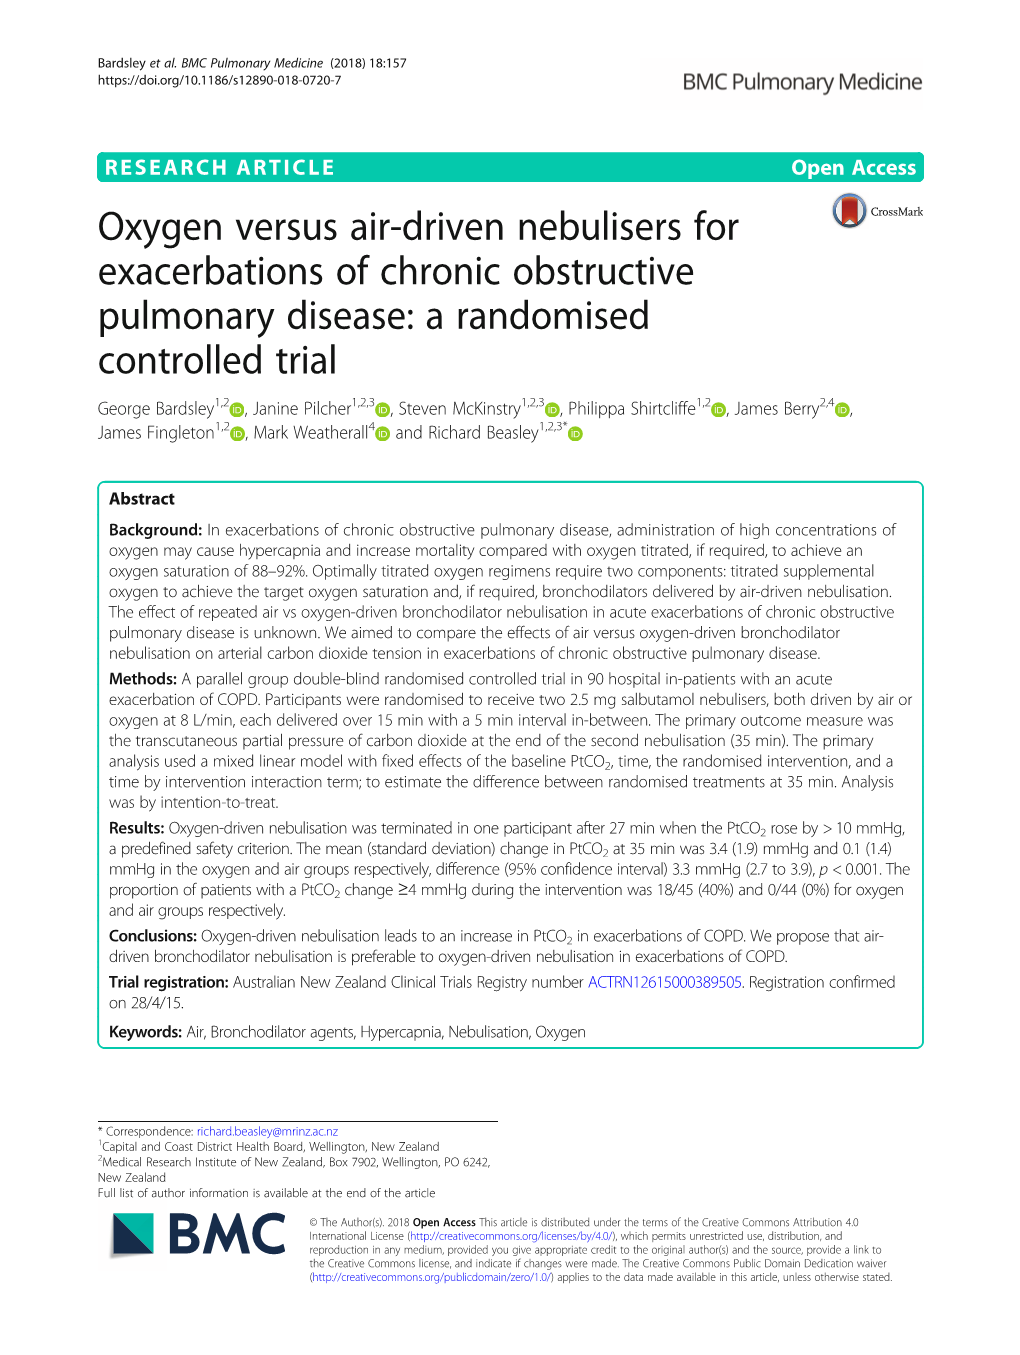 Oxygen Versus Air-Driven Nebulisers For